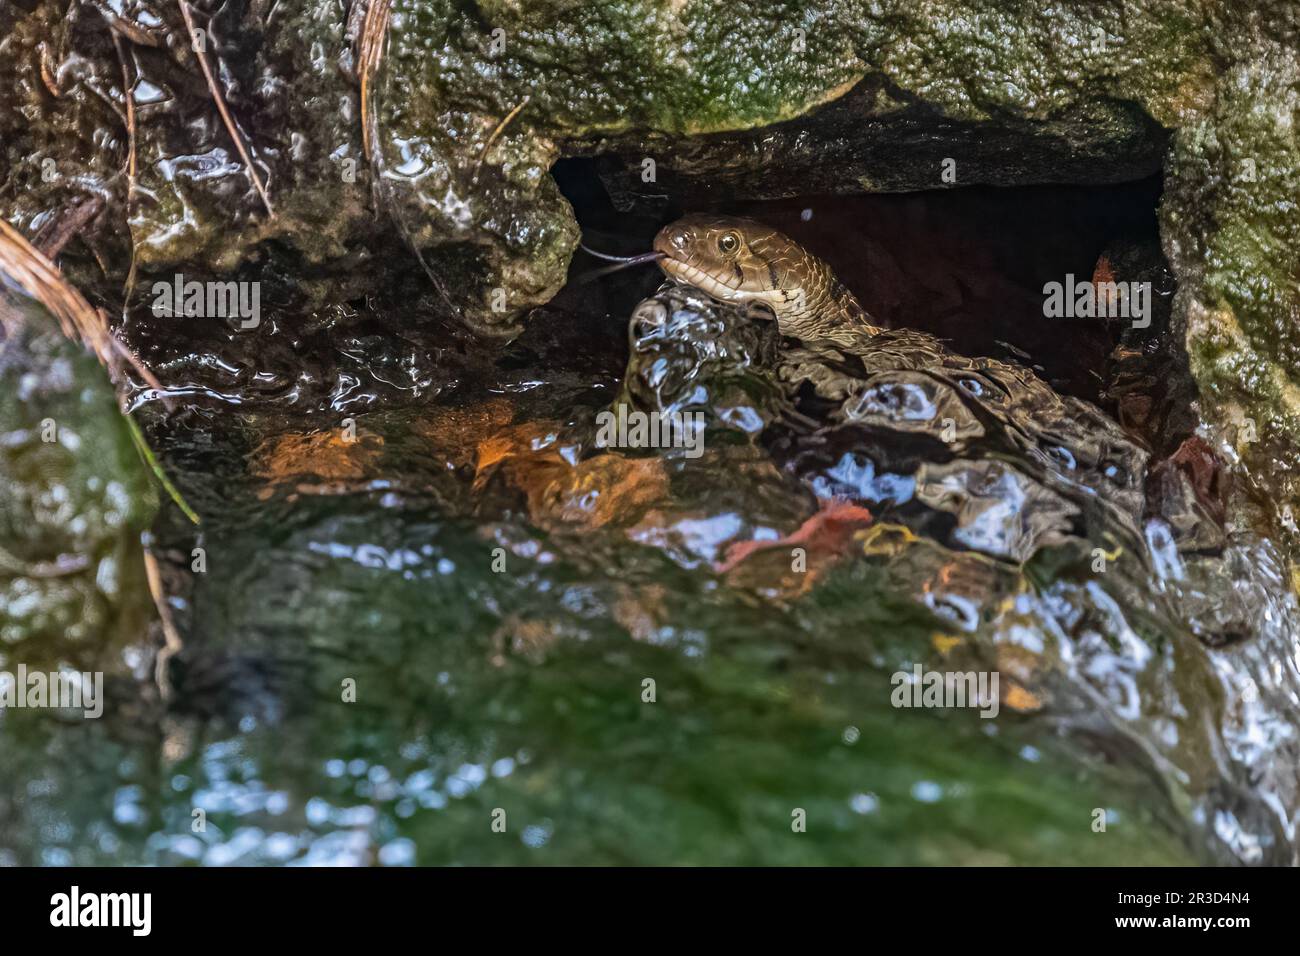 A Water snake with its tongue out Stock Photo